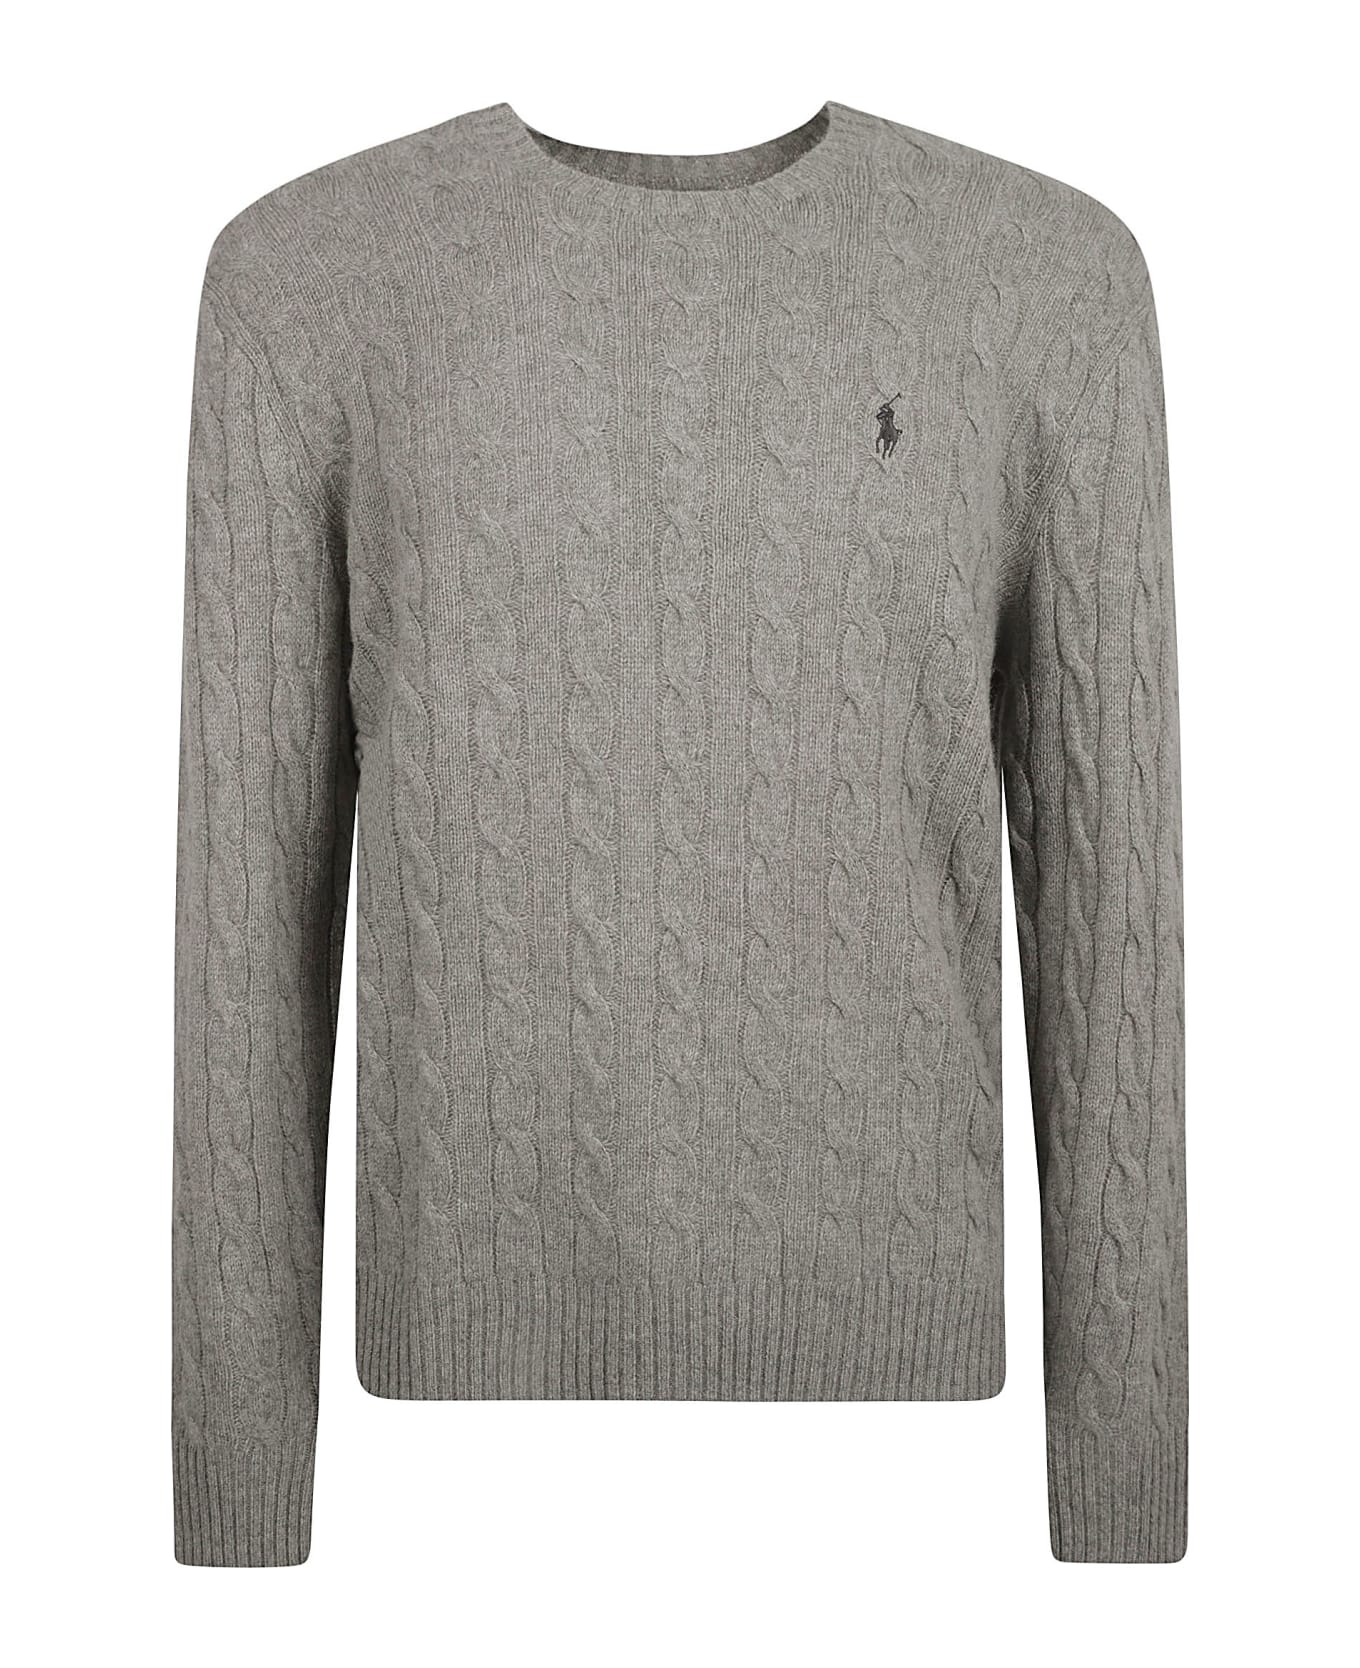 Ralph Lauren Logo Embroidery Patterned Woven Sweater - Fawn Grey Heather